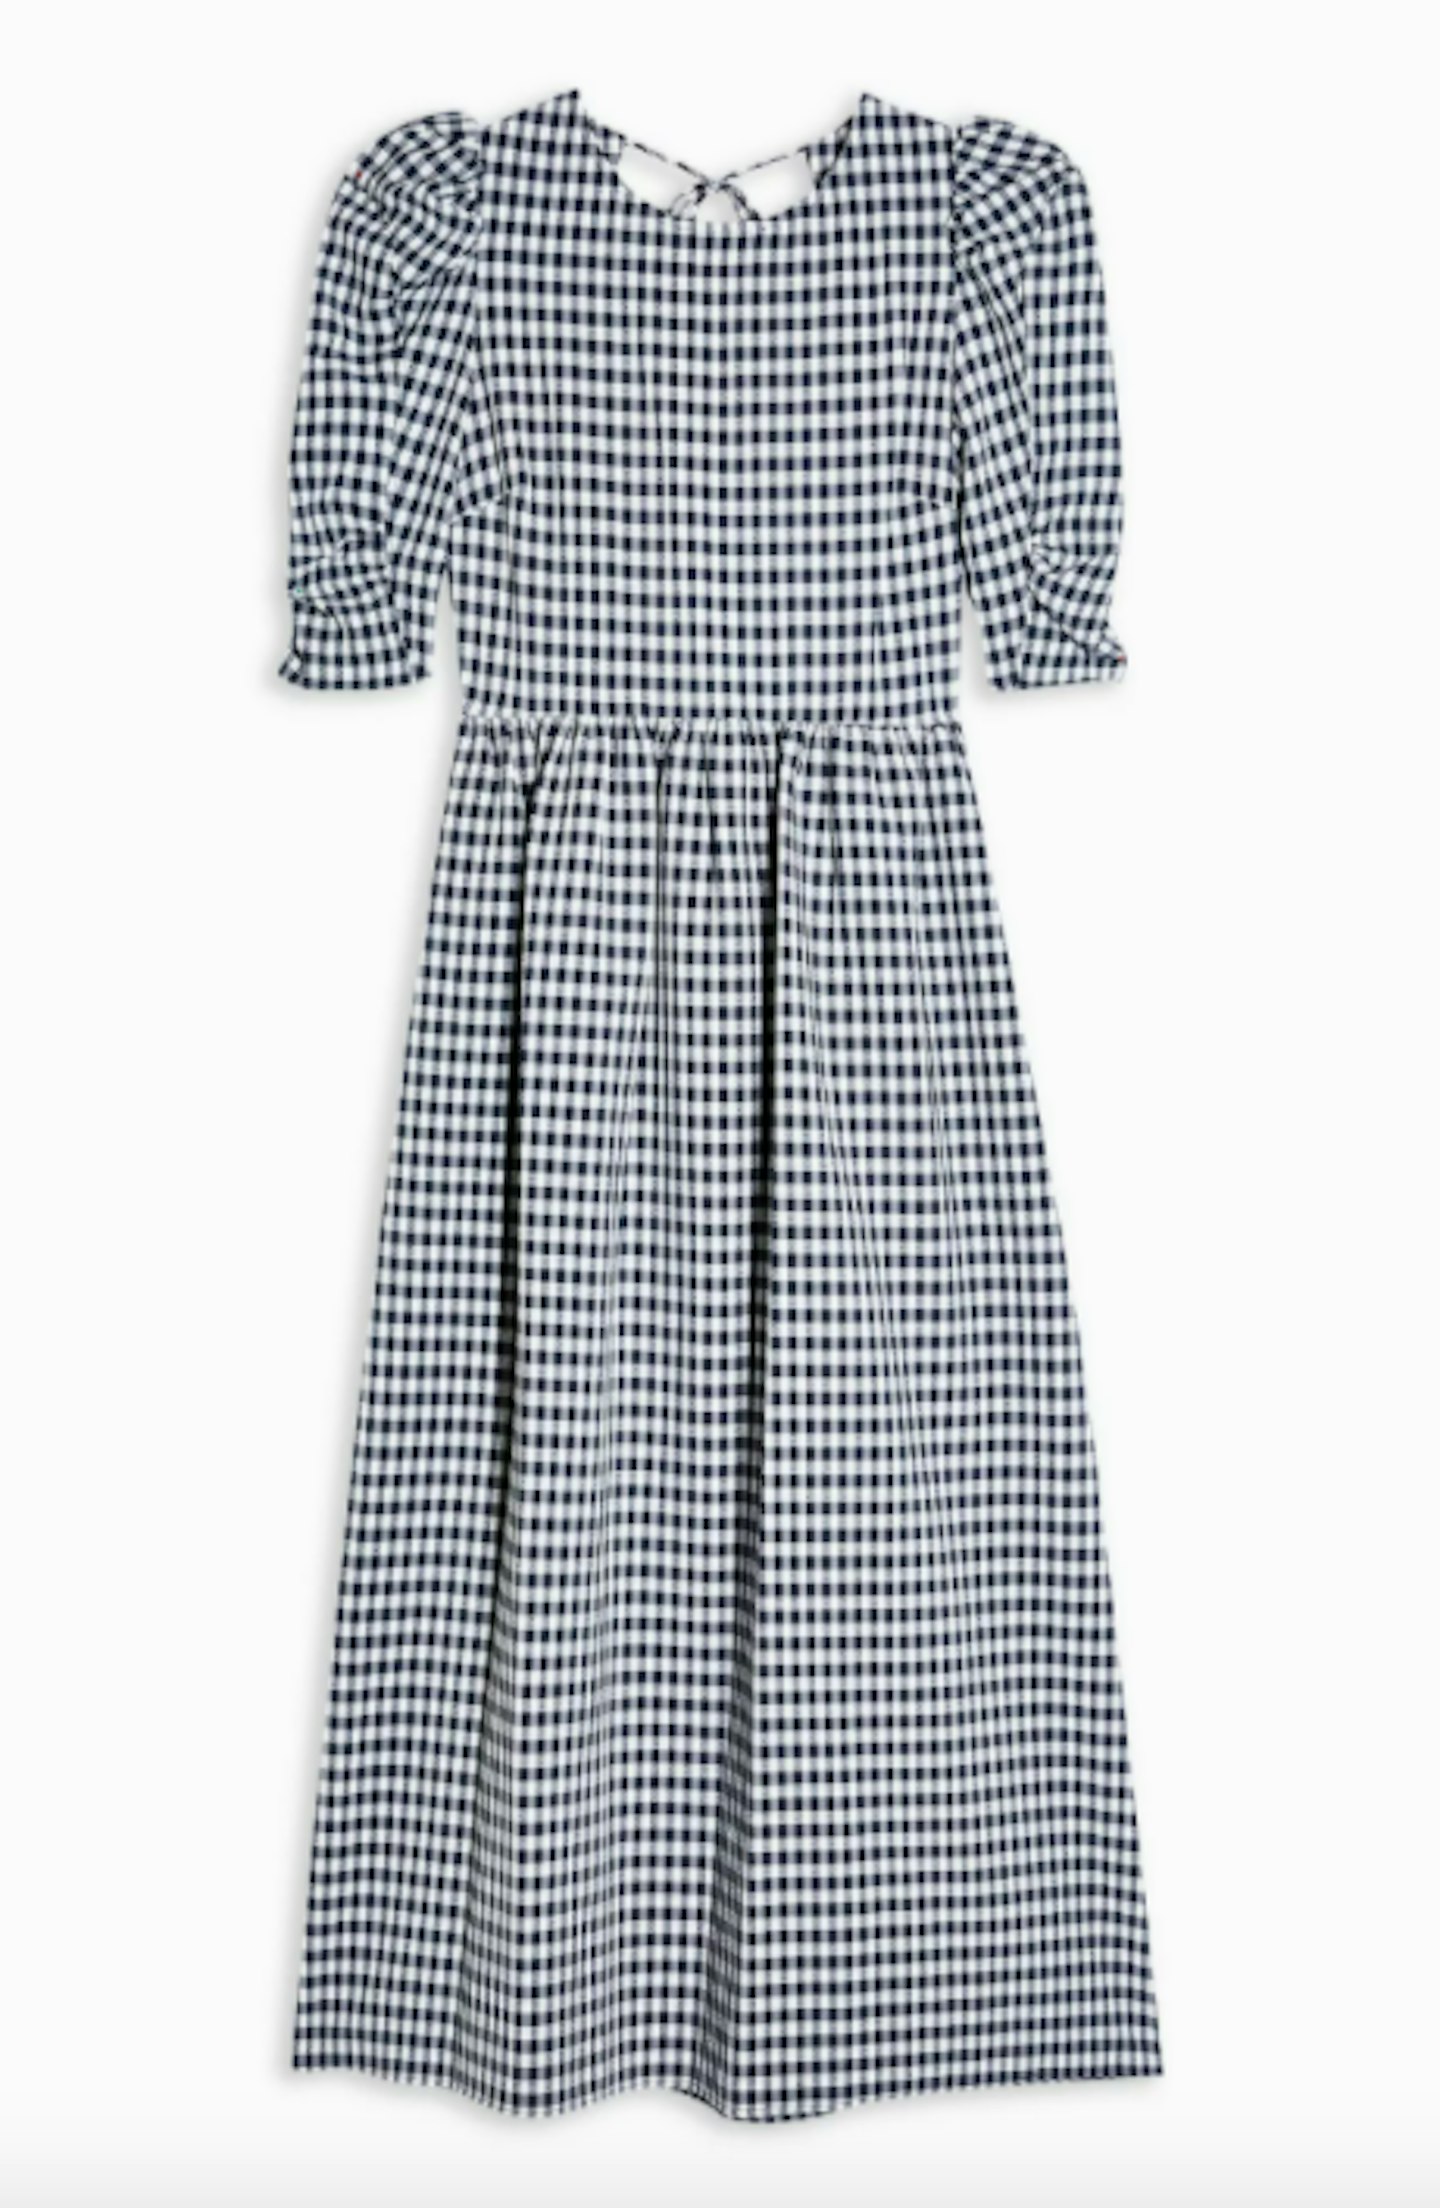 Topshop, Gingham Dress, WAS £40, NOW £25